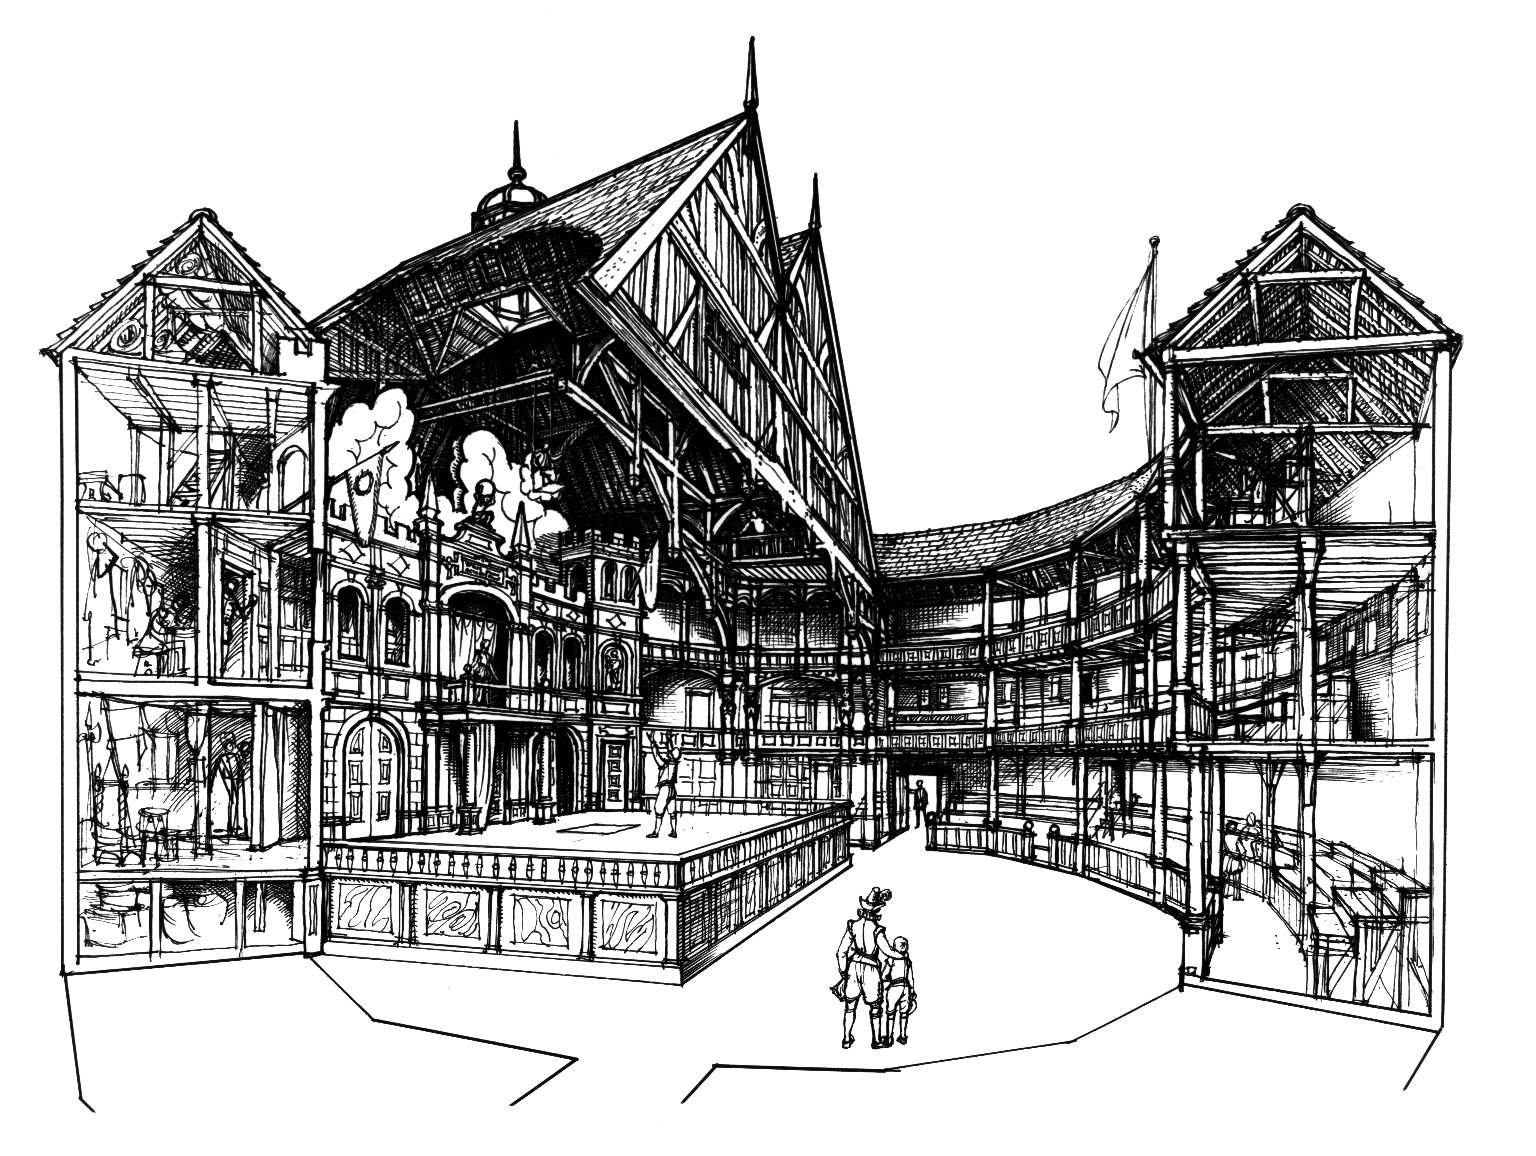 Conjectural, cut-away view of the interior of the Globe by C. Walter Hodges. Image courtesy of the Folger Digital Image Collection.